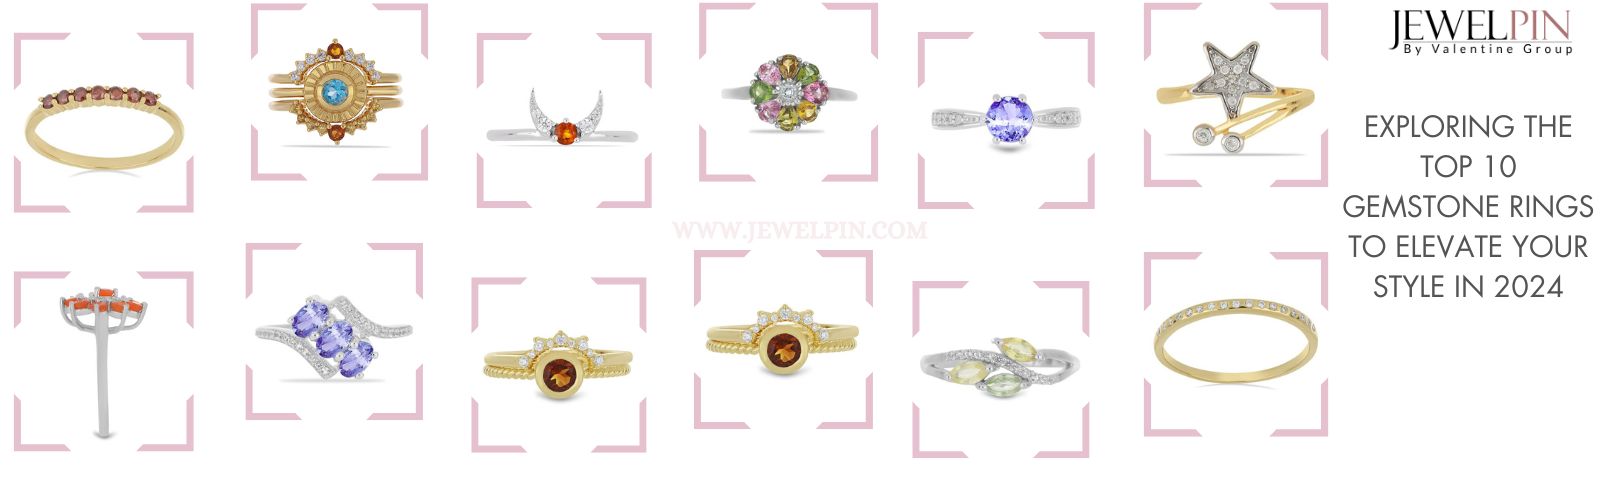 JewelPin - Exploring the top 10 gemstone rings to elevate your style in 2024